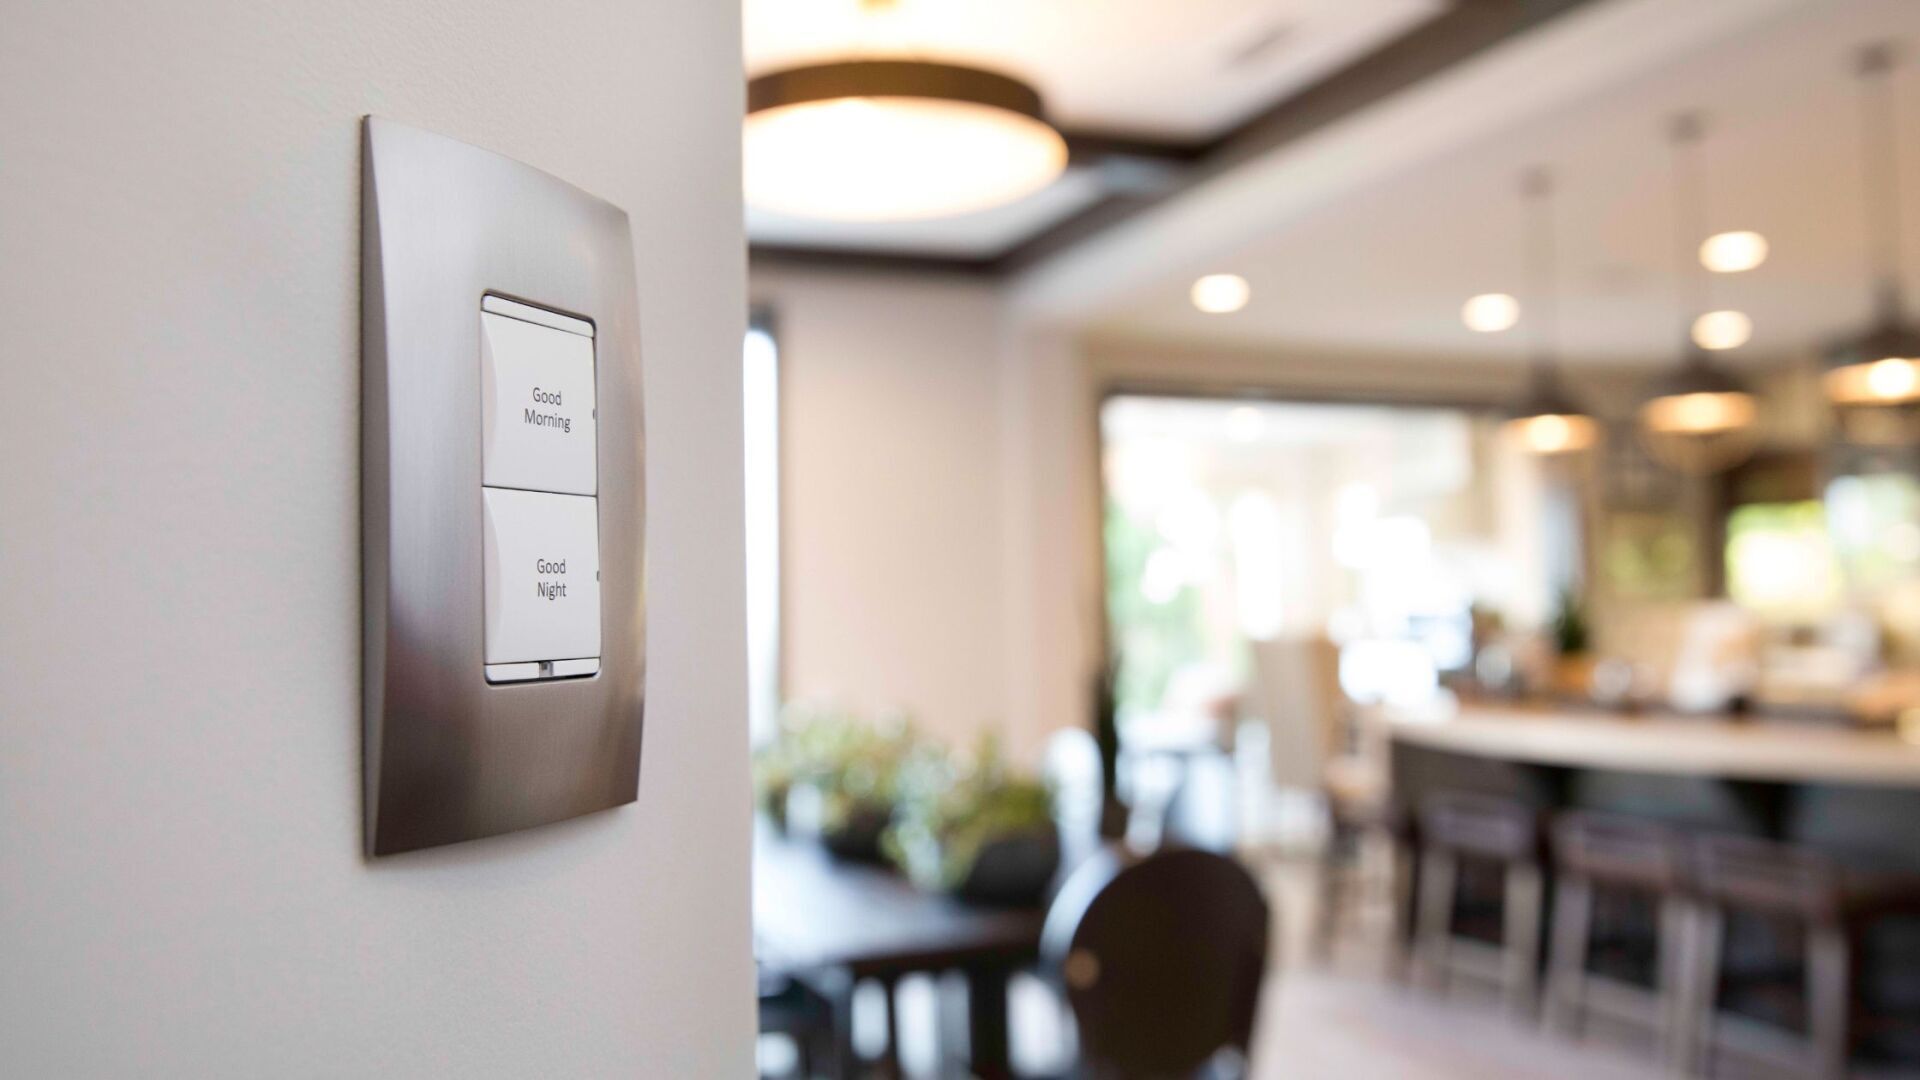 residential lighting control systems